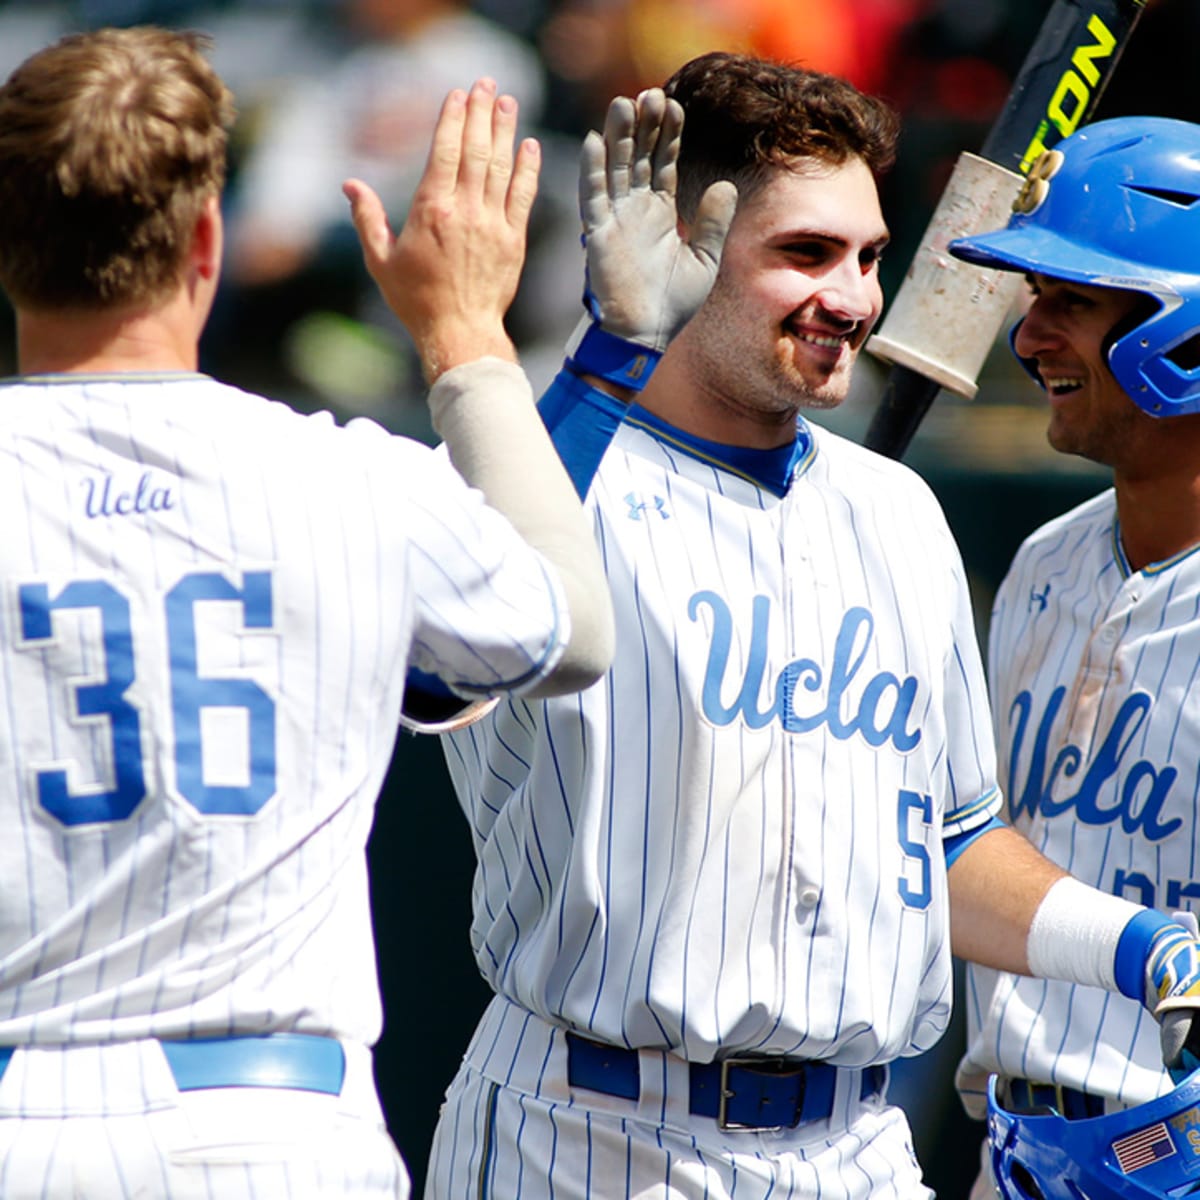 UCLA claims top seed in NCAA baseball tournament - Sports Illustrated